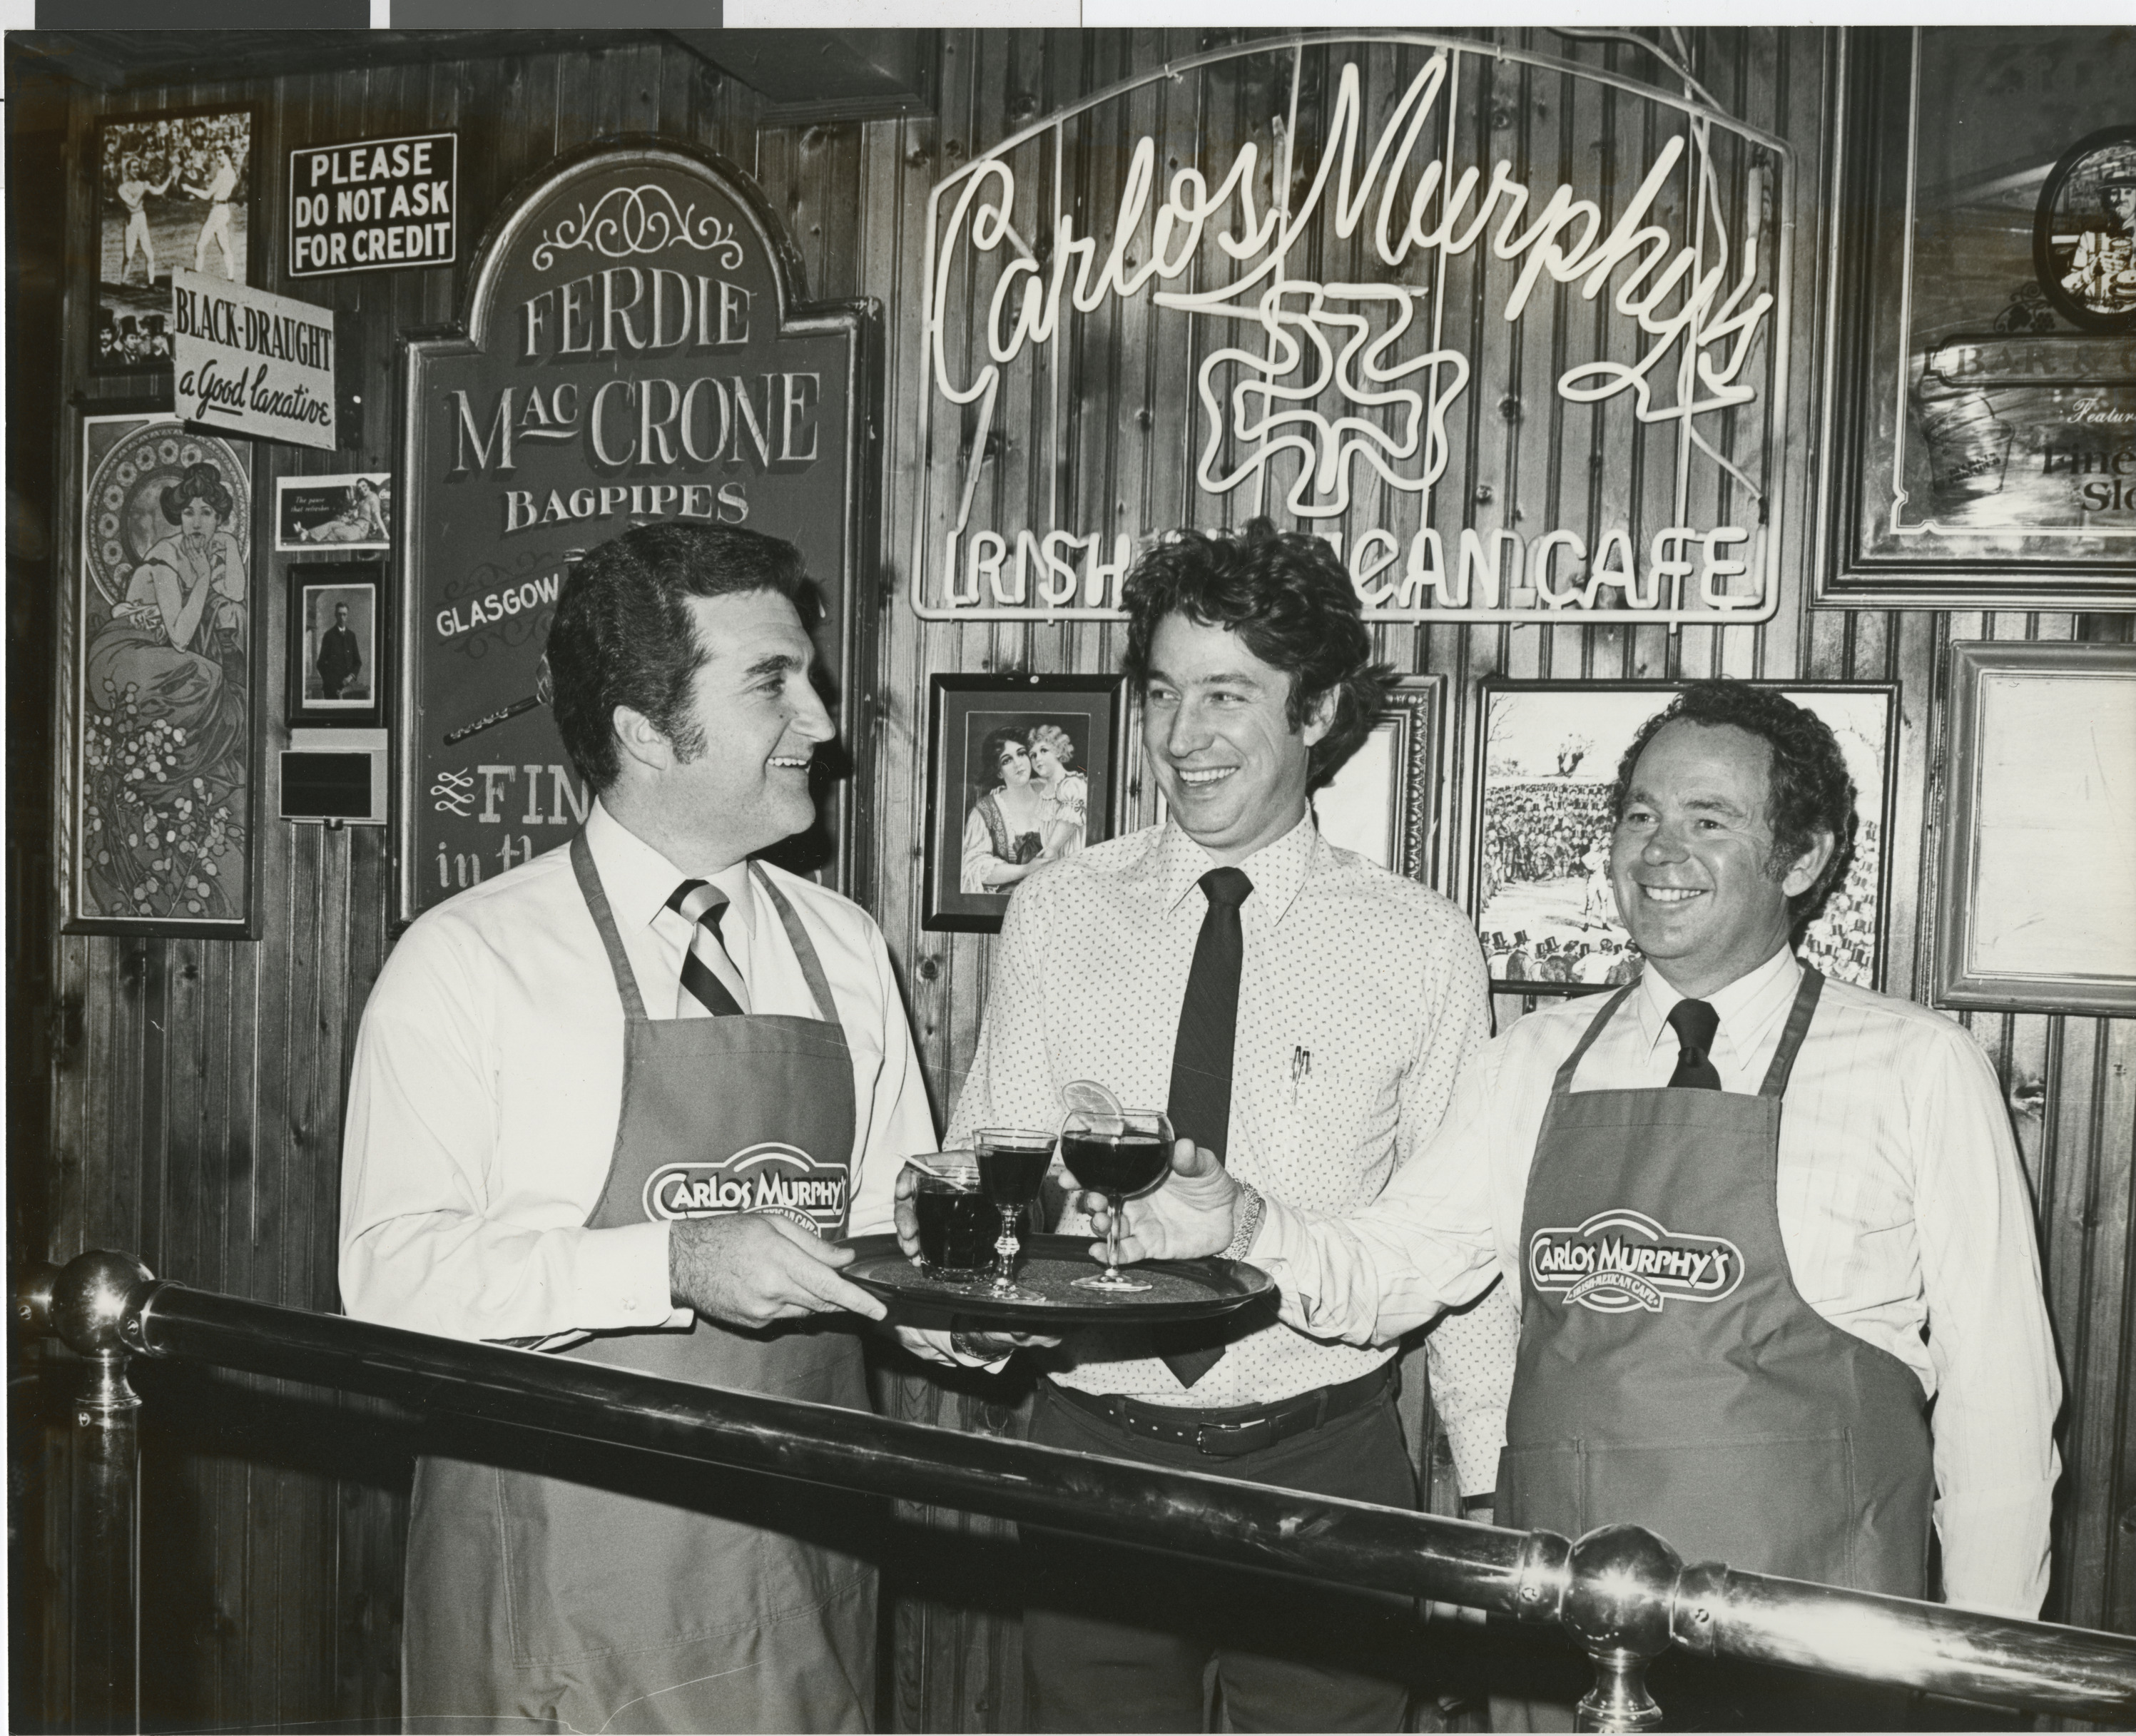 Photograph of Ron Lurie at Carlos Murphy's for a Boys Club benefit, October 20, 1981